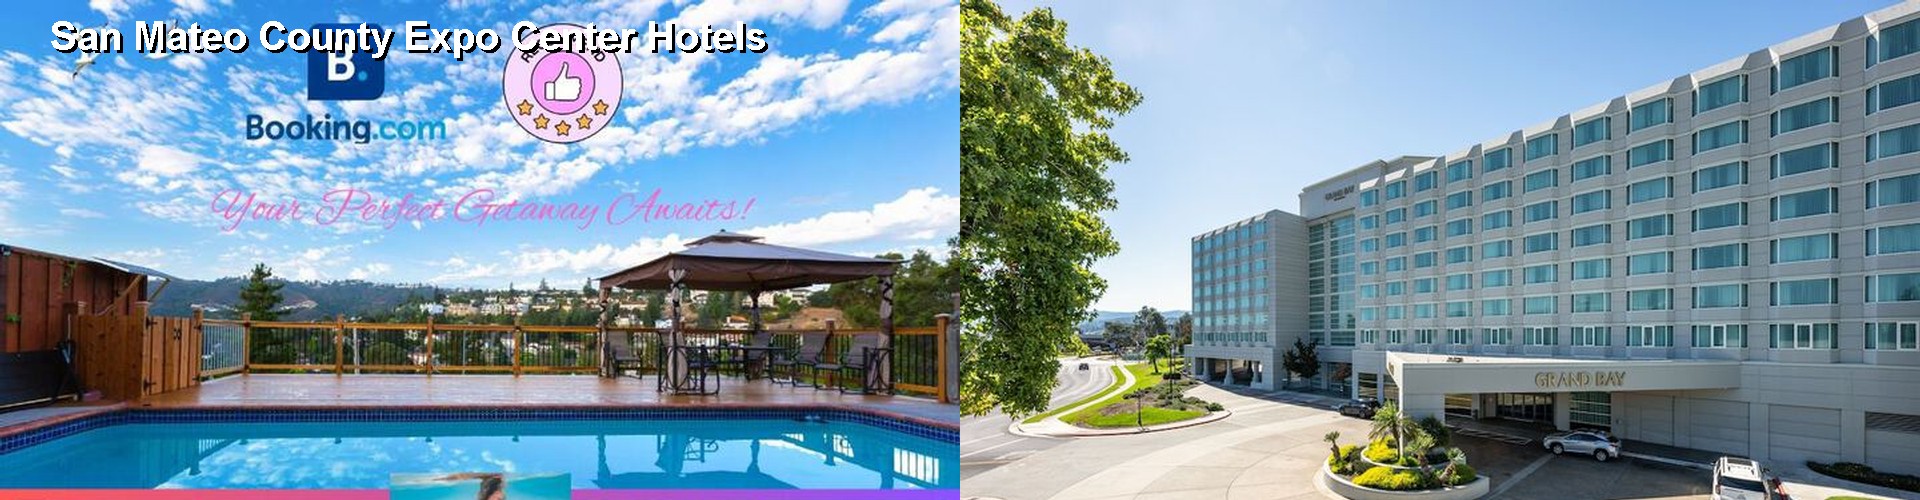 5 Best Hotels near San Mateo County Expo Center